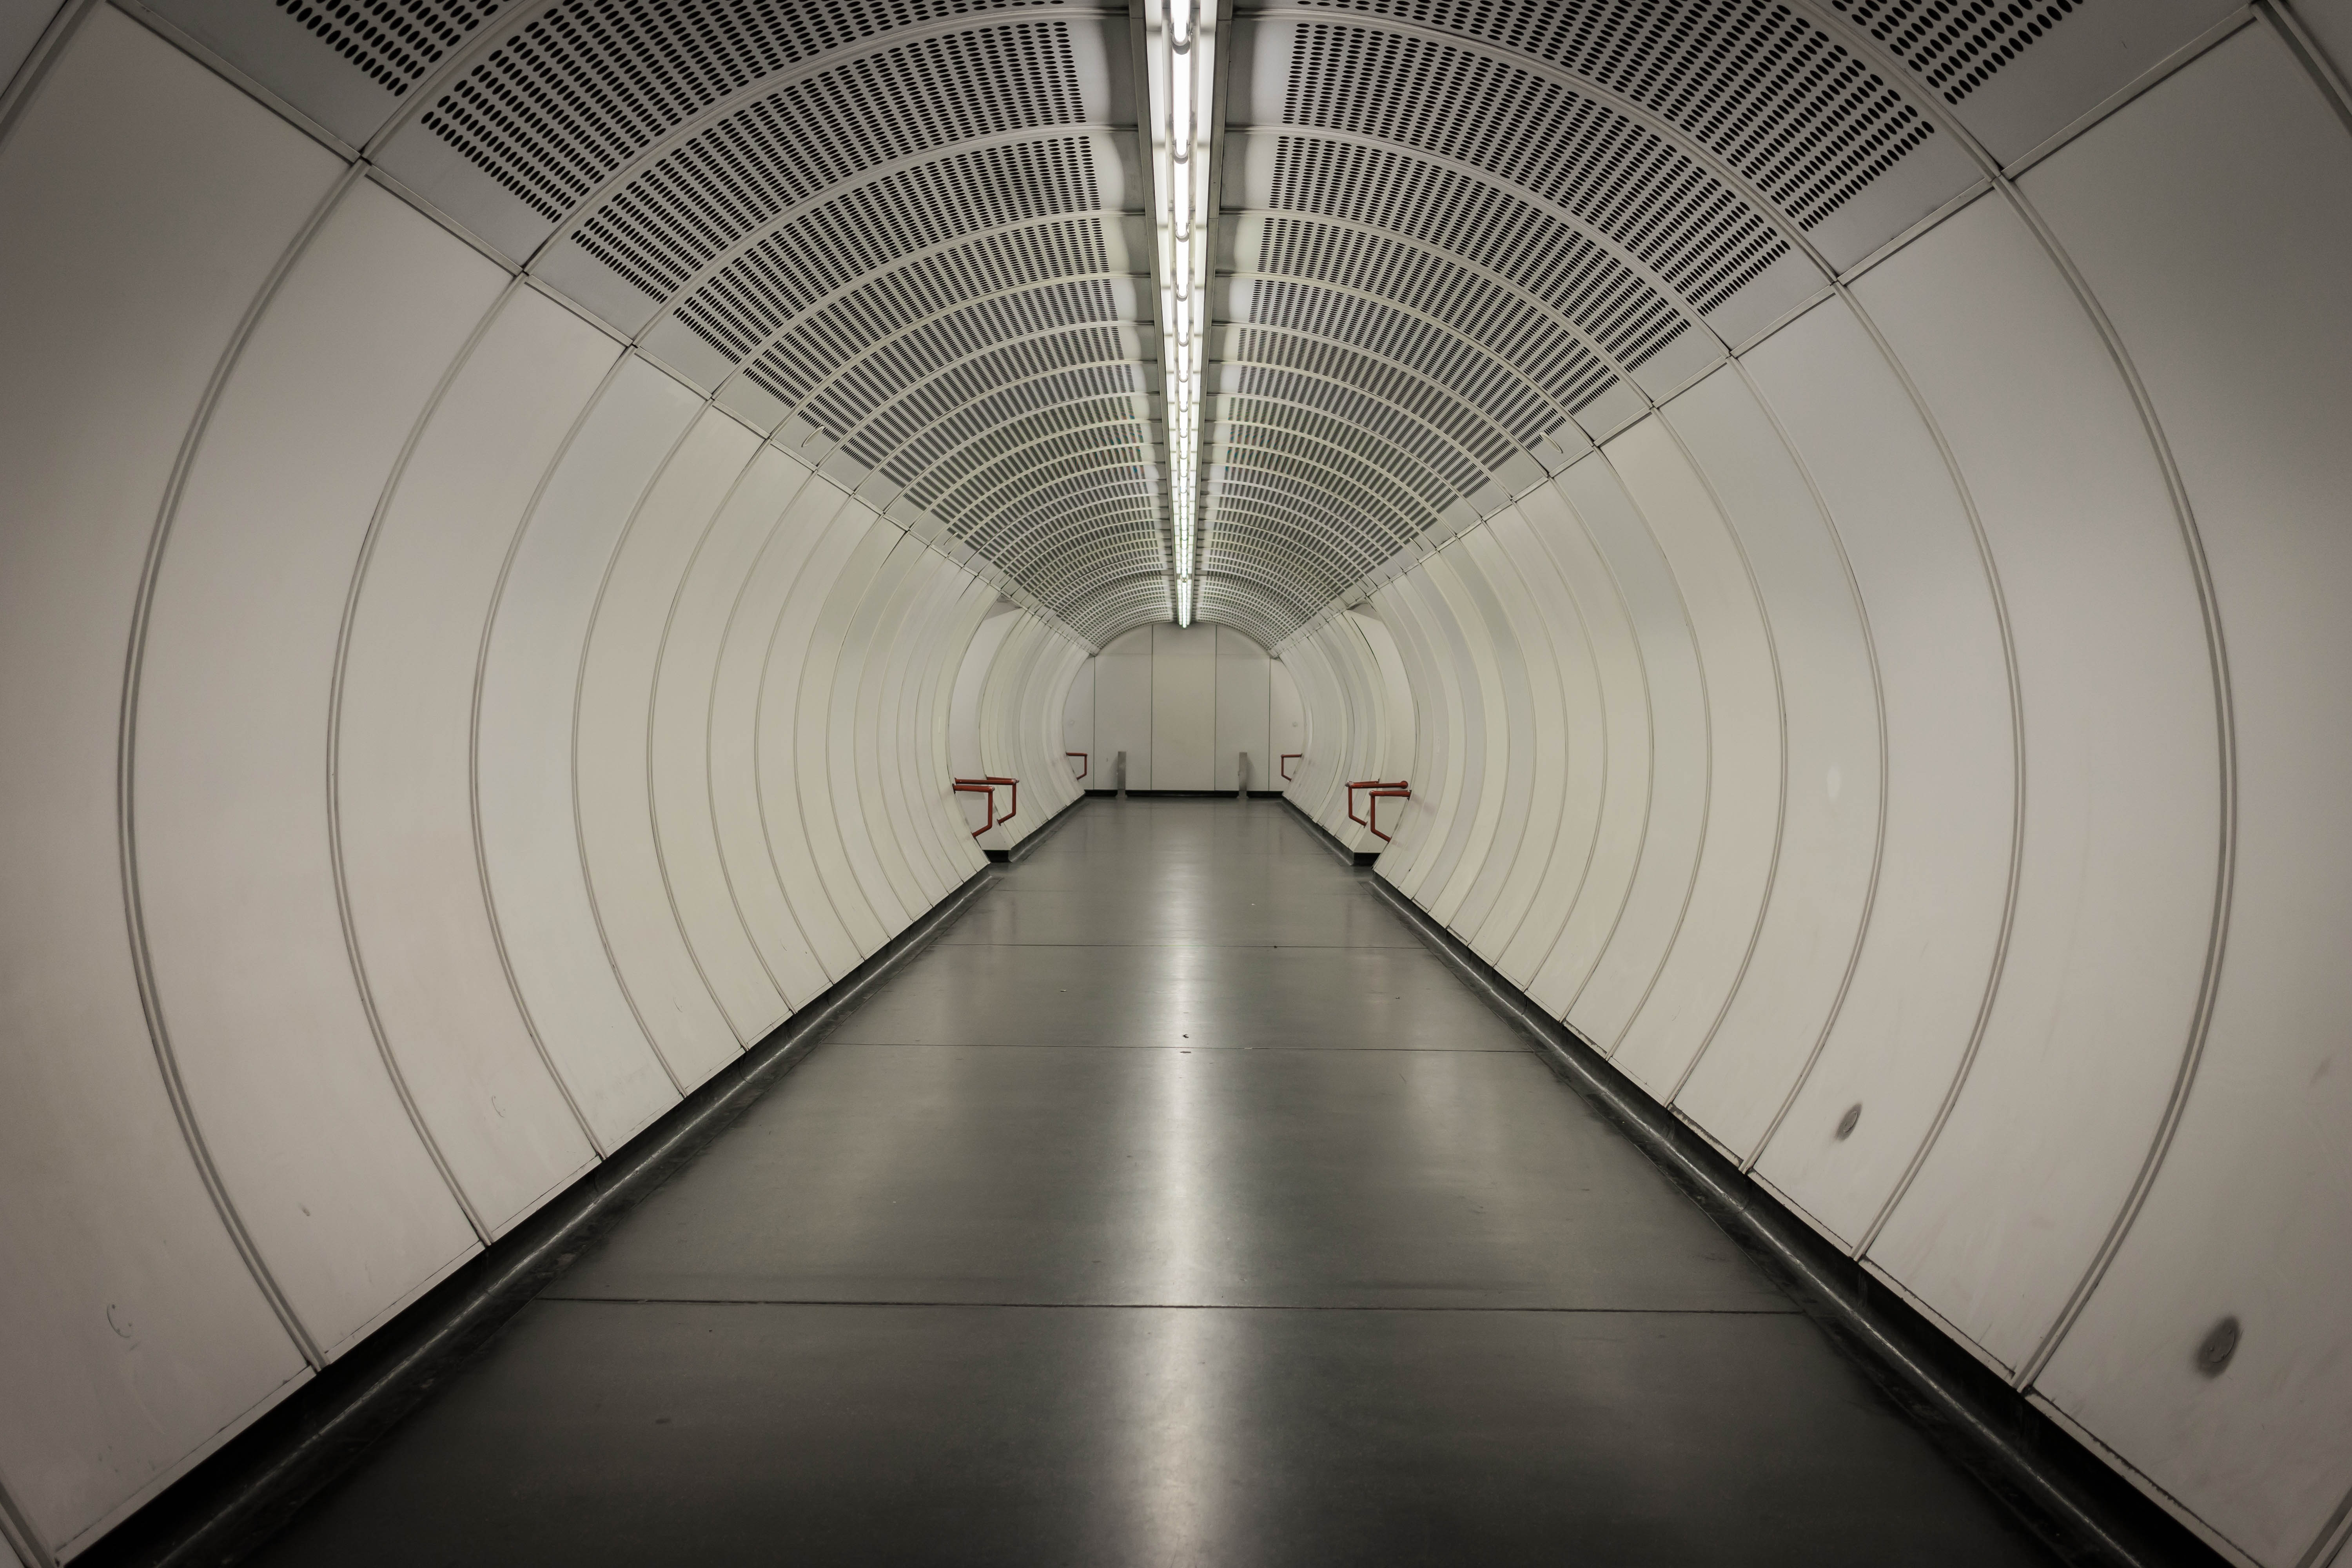 Tunnel to the future with many exits – usinglight